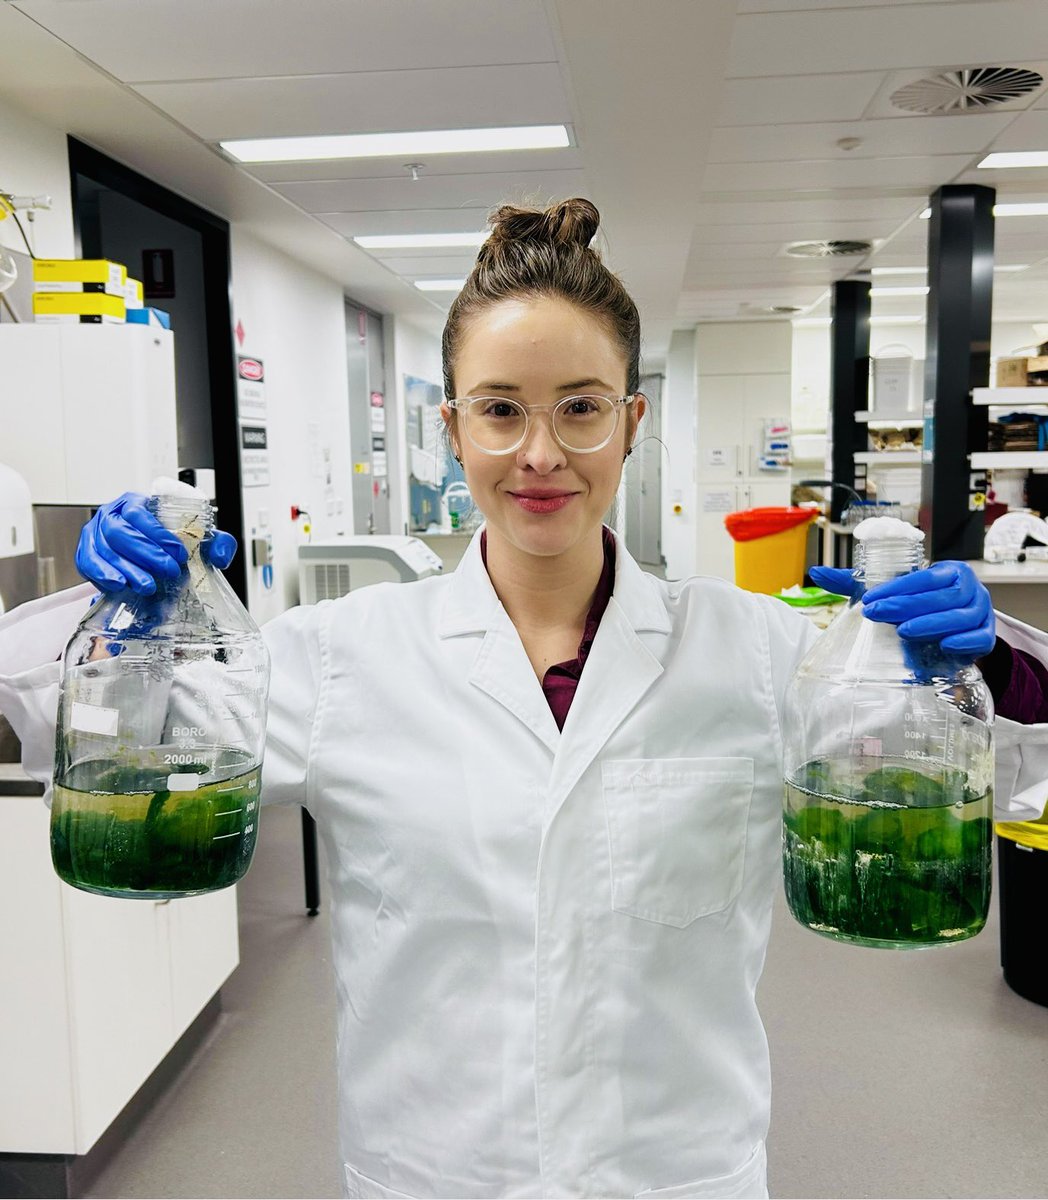 'Biosynthetically talented.' 
Among bacterial divisions, cyanobacteria are second only to the well-known and extensively studied actinobacteria in terms of BGC (biosynthetic gene clusters) abundance  - Blin et al., 2019.
#microbiology #cyanobacteria #naturalproducts